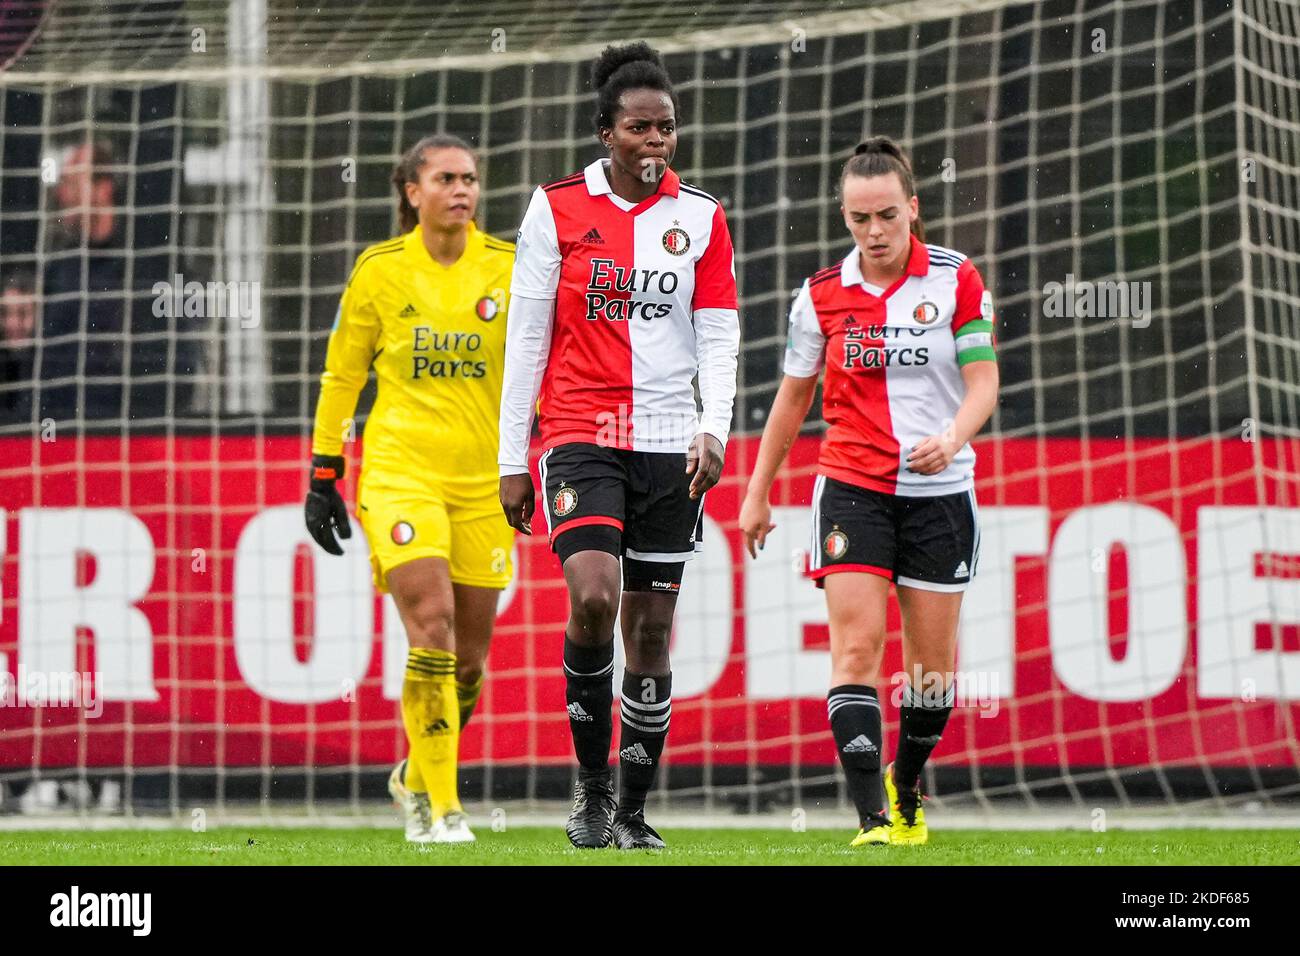 Rotterdam - Danique Ypema of Feyenoord V1 reacts to the 0-2 during the match between Feyenoord V1 v Ajax V1 at Nieuw Varkenoord on 6 November 2022 in Rotterdam, Netherlands. (Box to Box Pictures/Tom Bode) Stock Photo